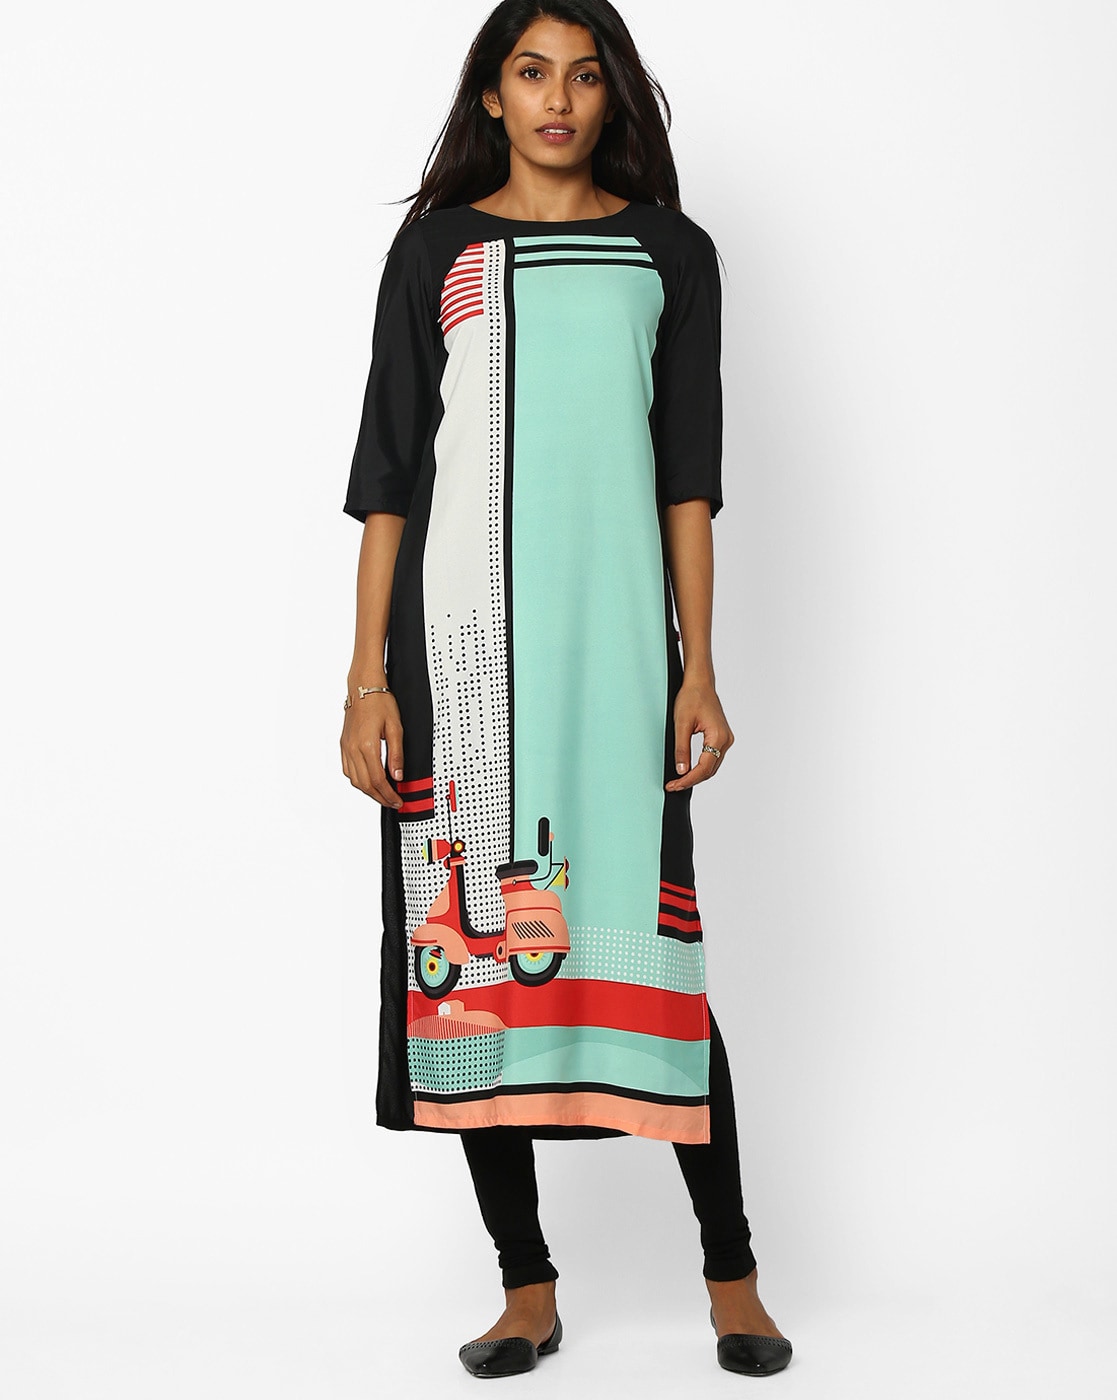 The Best W Kurtis of 2019 End Your Search for the Most Stylish Ethnic  Kurtis with Our Handpicked Selection of the Finest Offerings from W